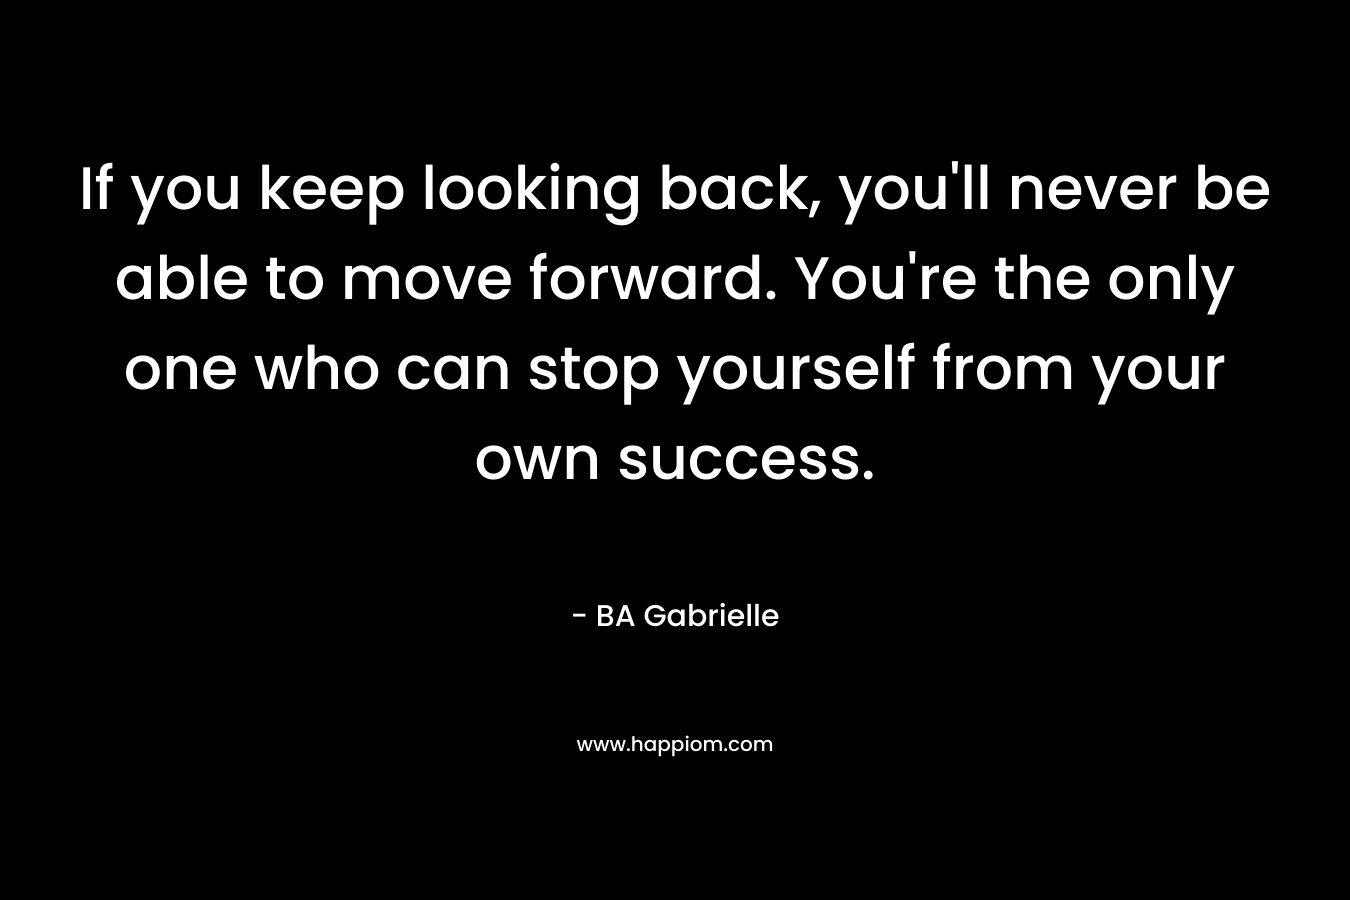 If you keep looking back, you'll never be able to move forward. You're the only one who can stop yourself from your own success.